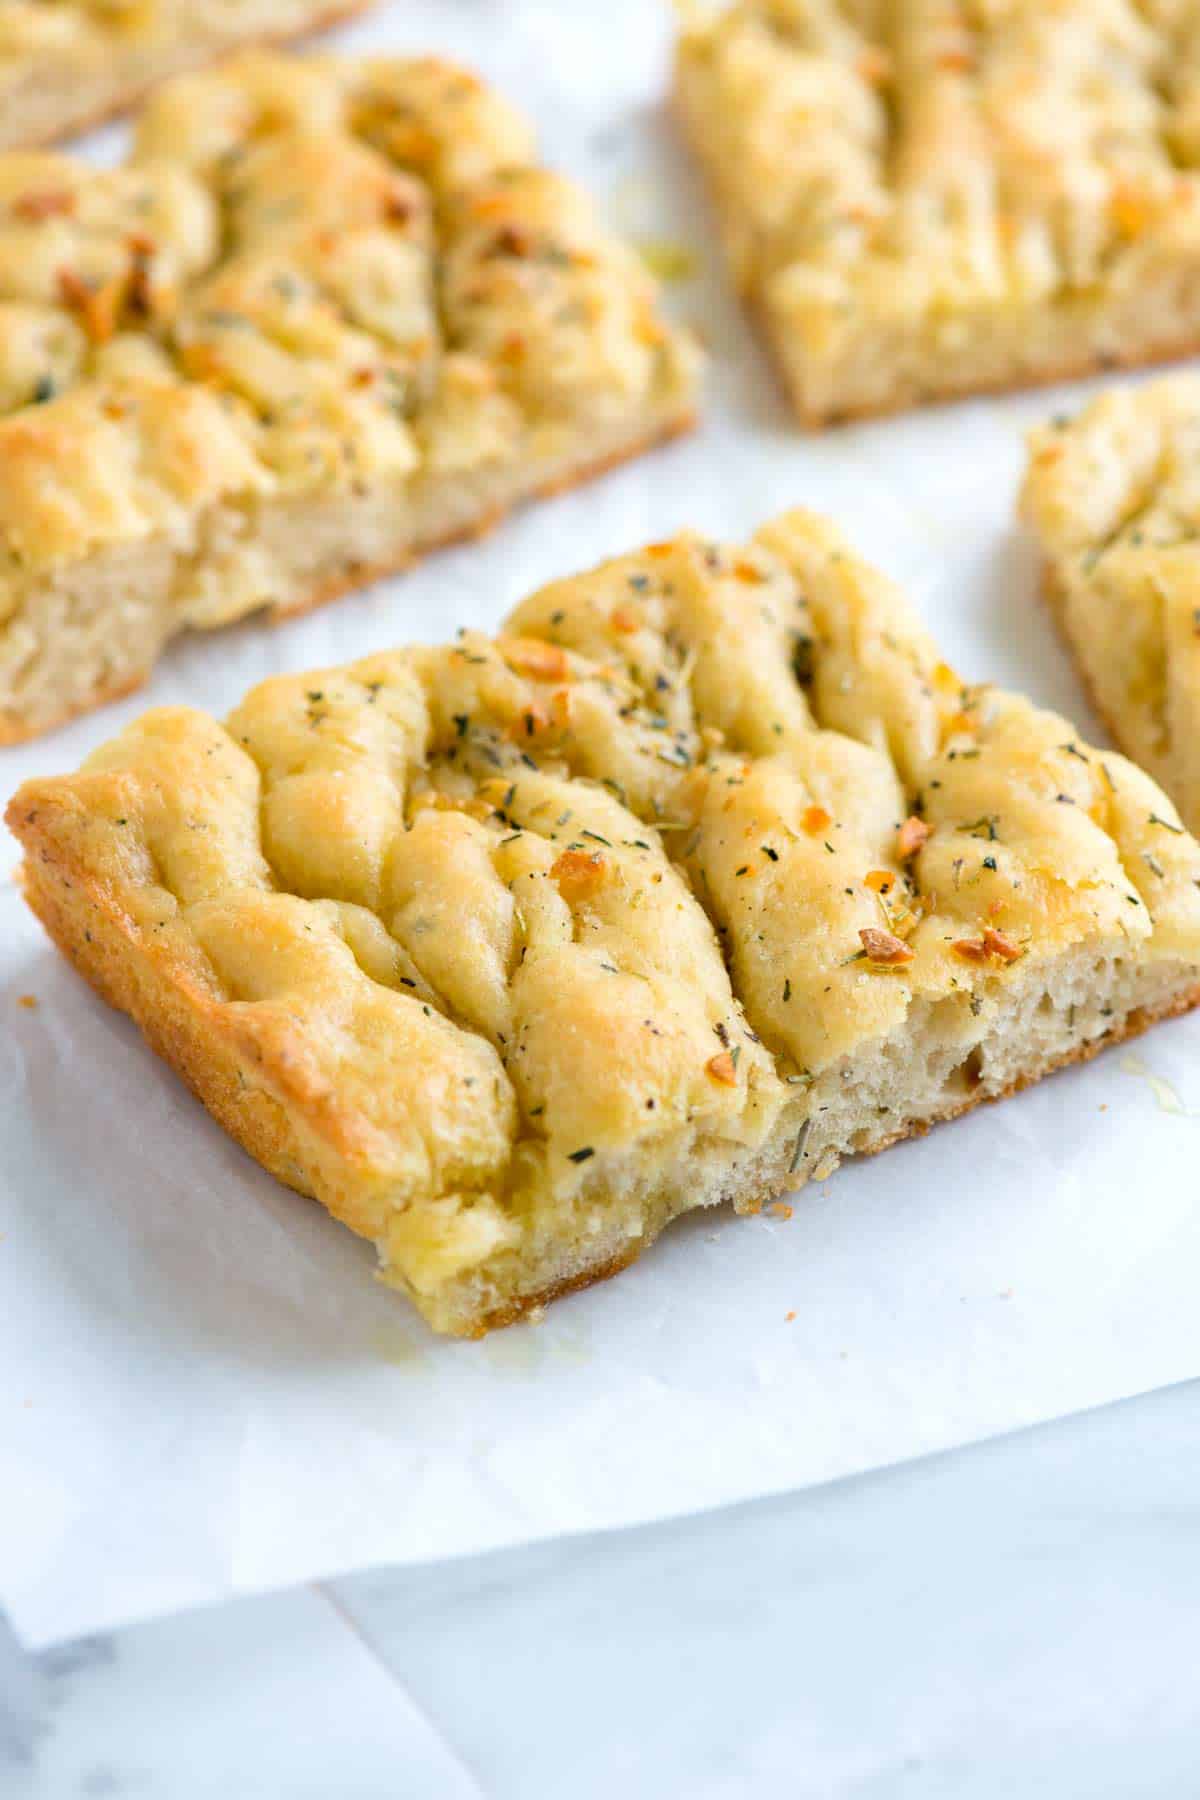 Easy Focaccia Bread Recipe with Garlic and Herbs